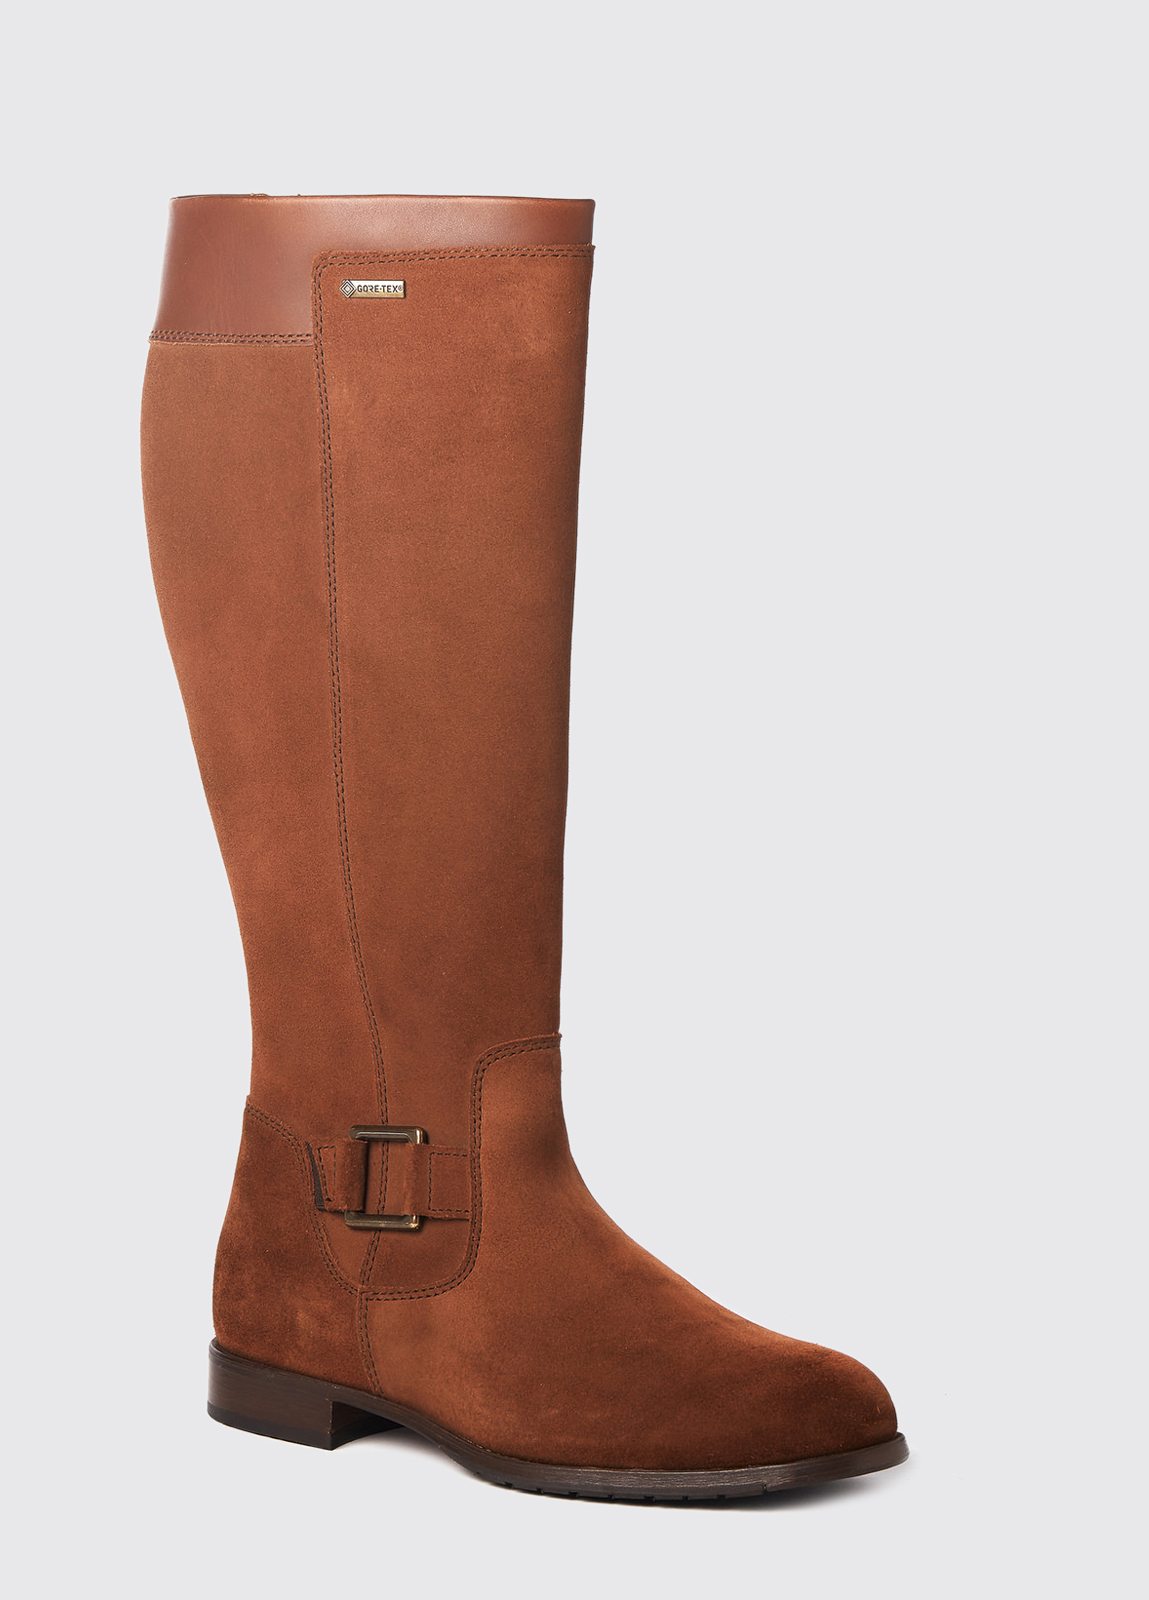 Limerick Soled Boot | Dubarry